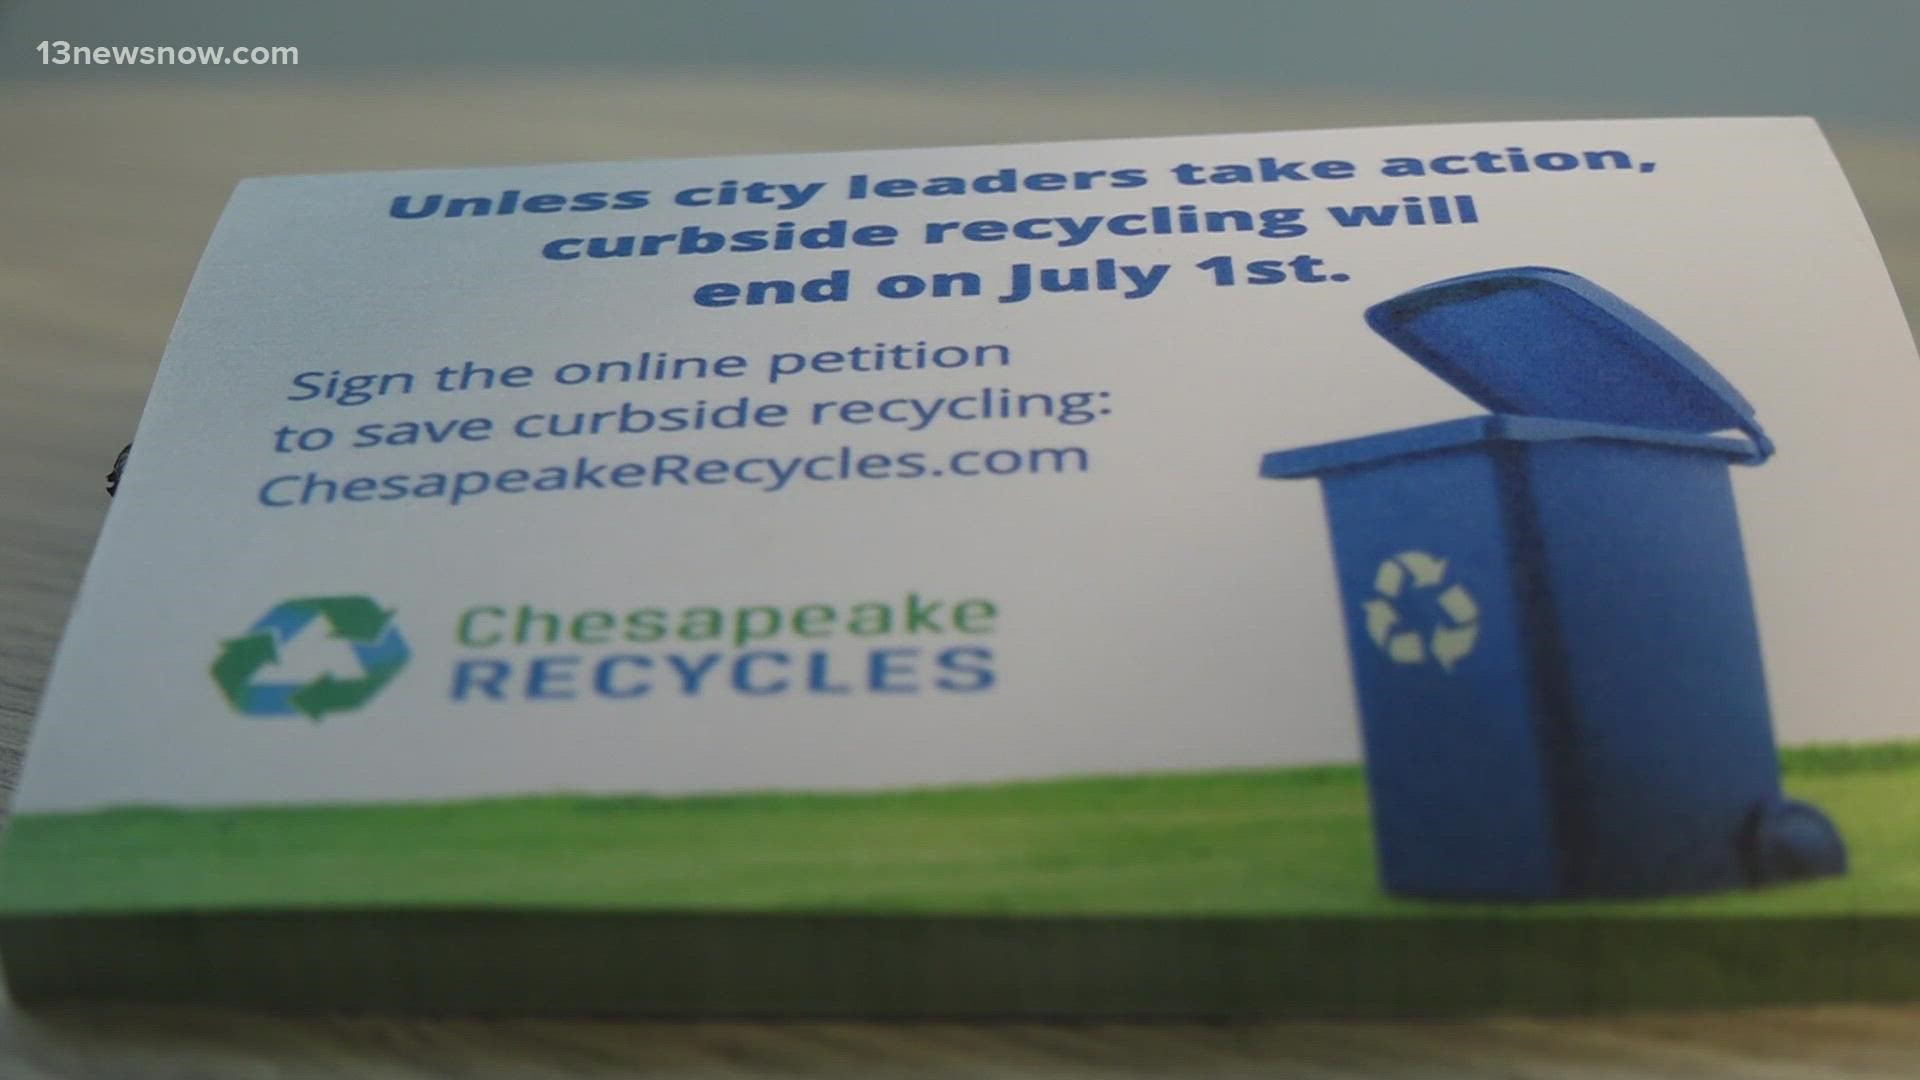 The City of Chesapeake Recycling program is set to end on June 30, 2022. thousands of people are signing a petition to urge leaders to change course.